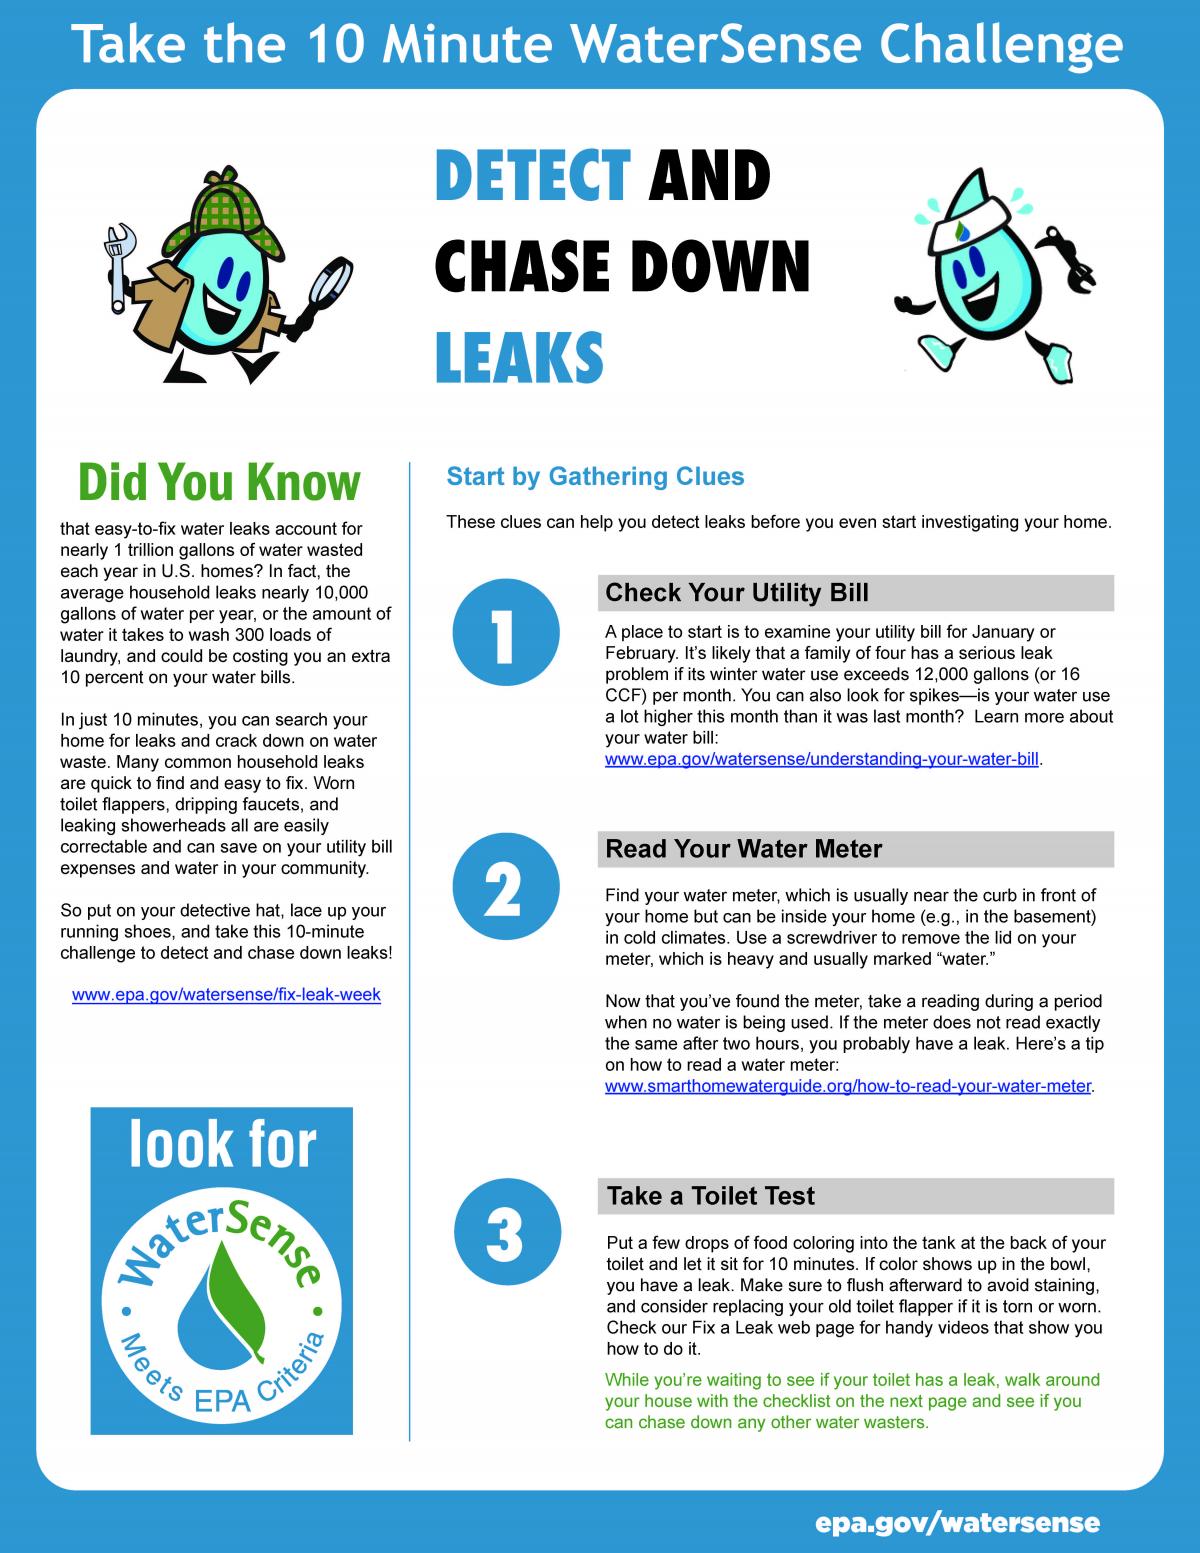 Detect & Chase Down Leaks